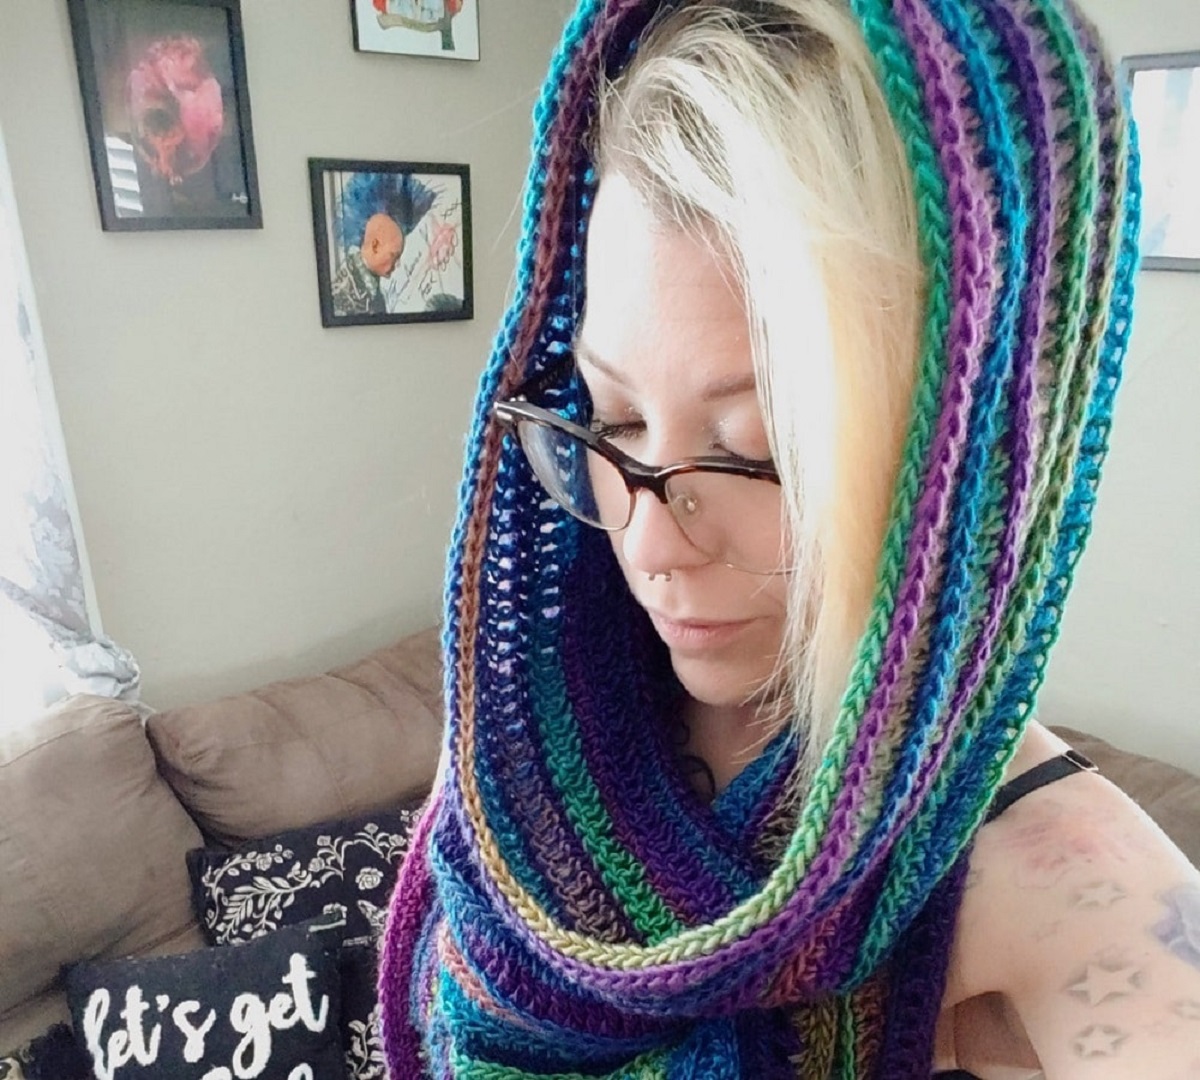 Blonde woman in glasses wearing a purple, blue, green, and yellow striped hooded scarf.